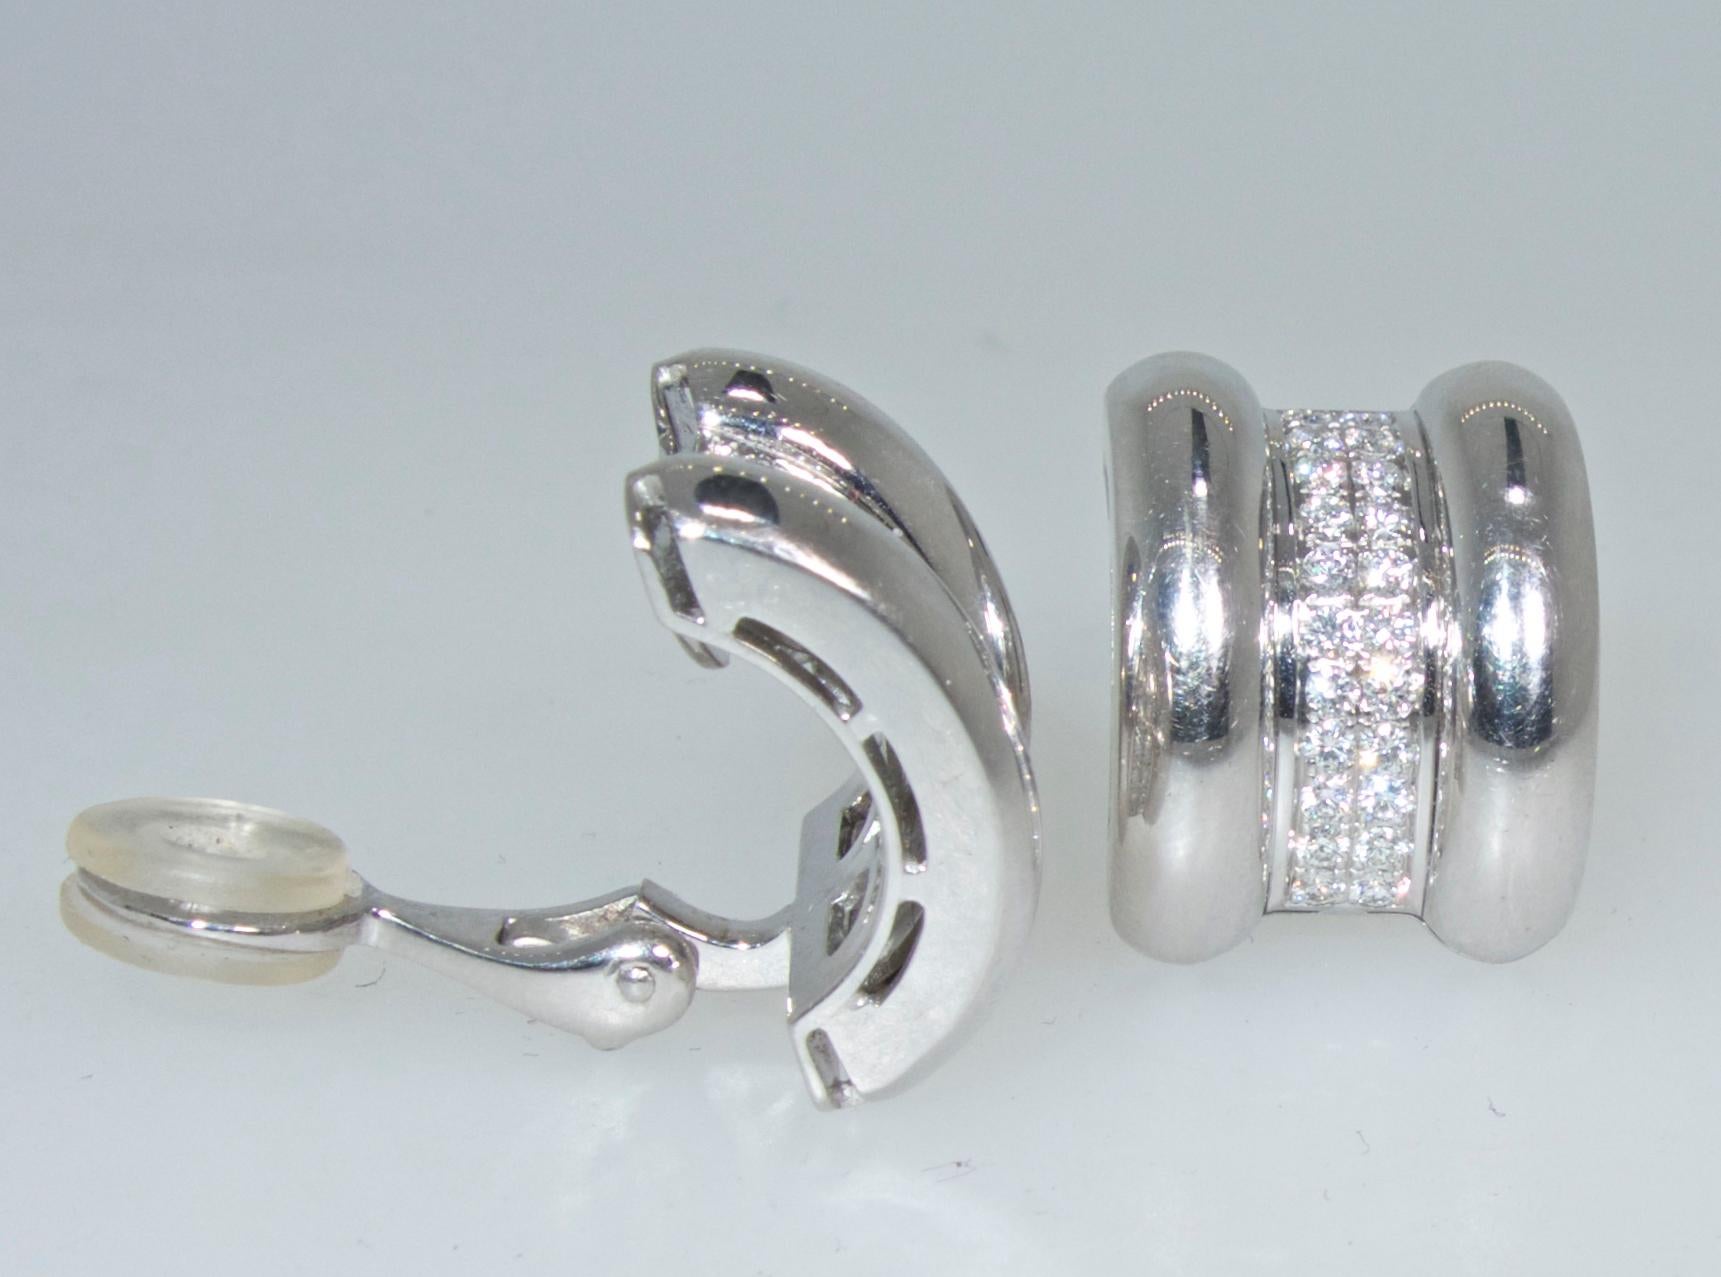 18K white gold with fine white diamonds.   There are 44 well cut, well matched fine round brilliant cut diamonds weighing approximately 1. ct.  These earrings made by the world famous jewelry and watch house, Chopard are in new like condition and